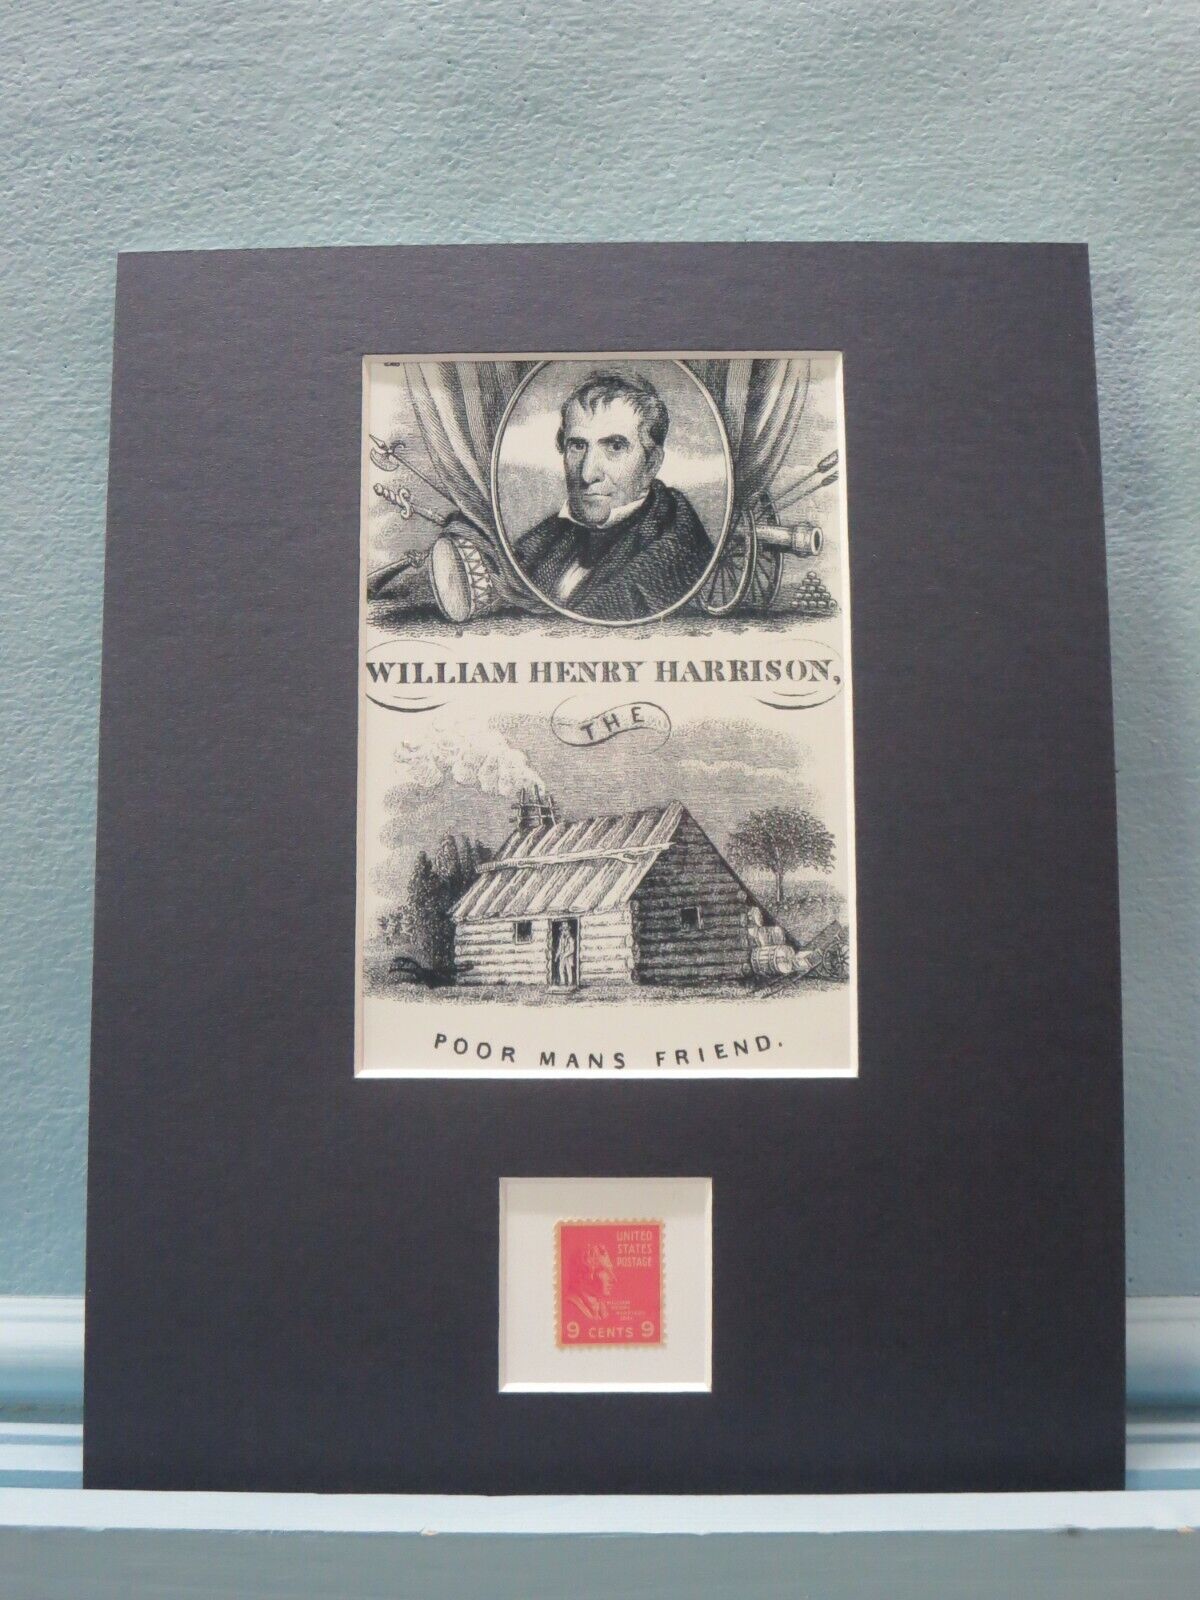 William Harrison wins the 1840 Presidential Election honored by his own stamp